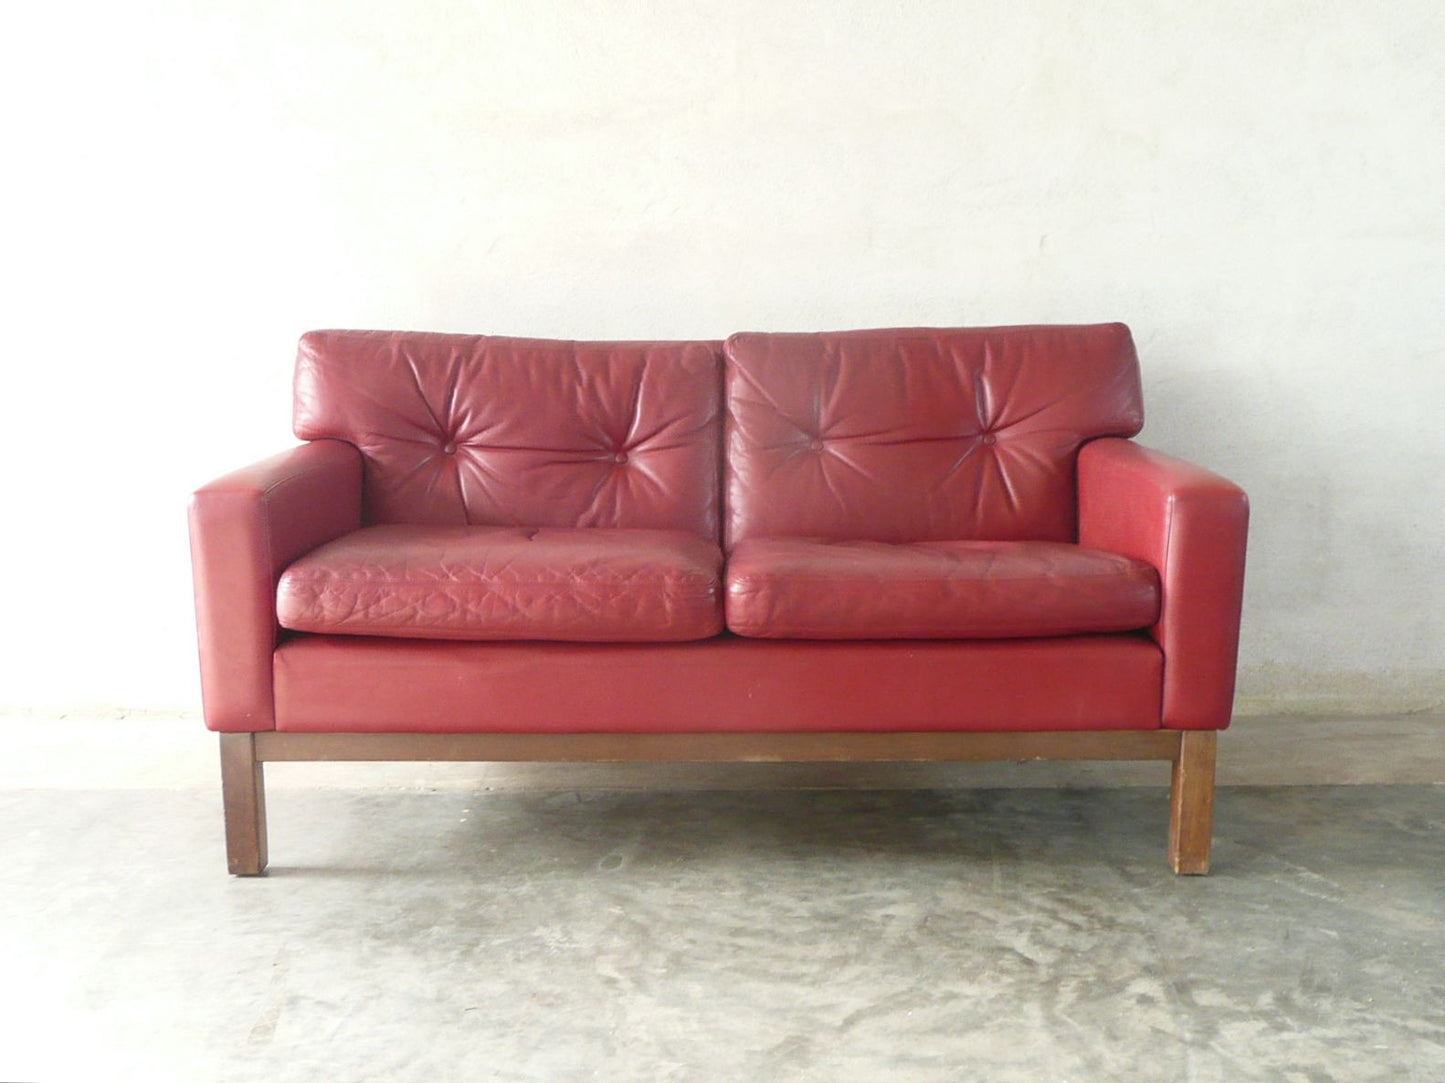 New price: Finnish two seat leather sofa